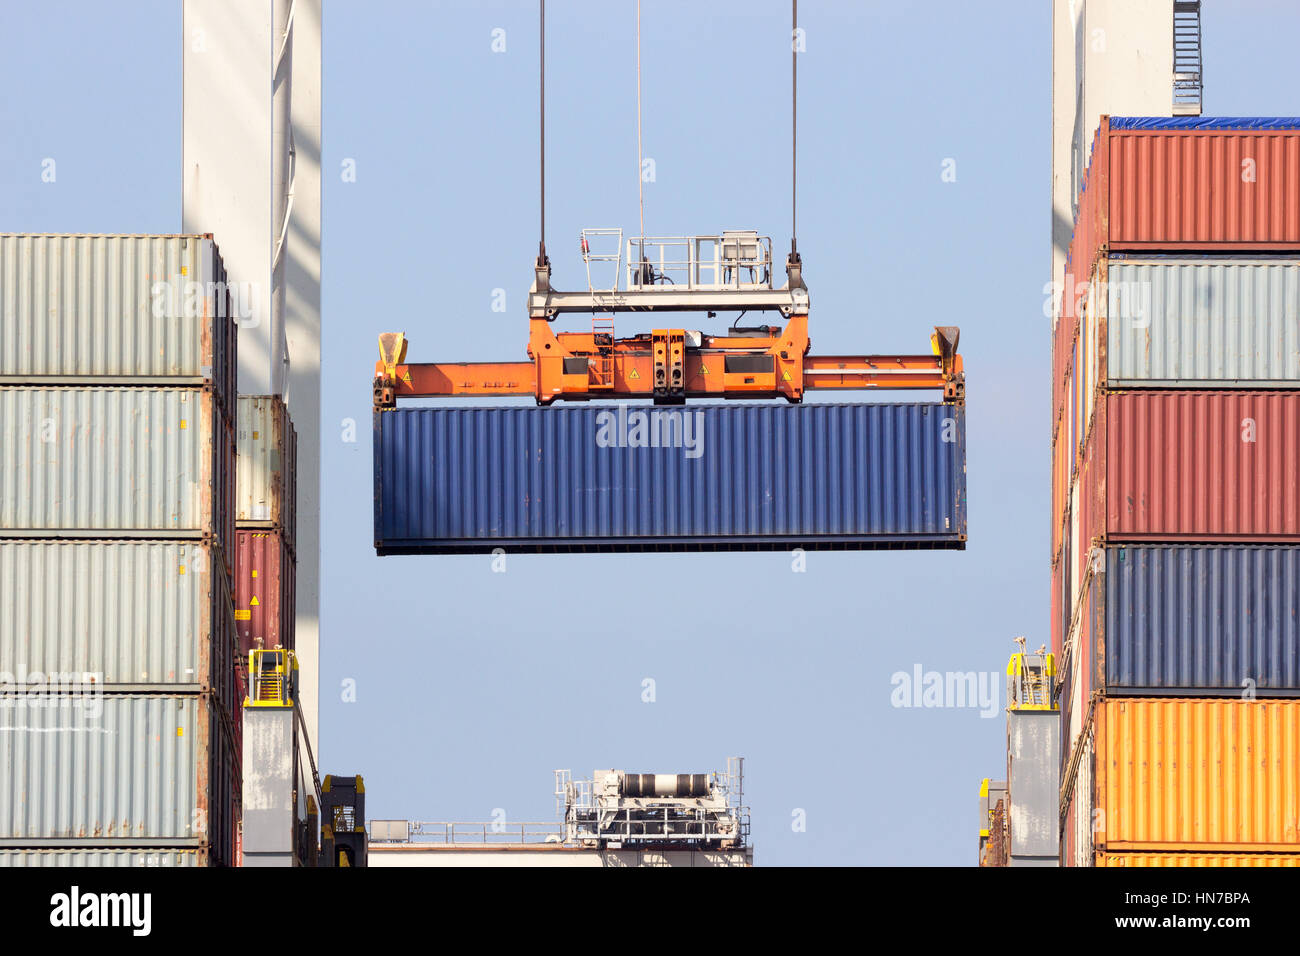 Sea container loaded onto a ship with a gantry crane in the Port of Rotterdam. Stock Photo